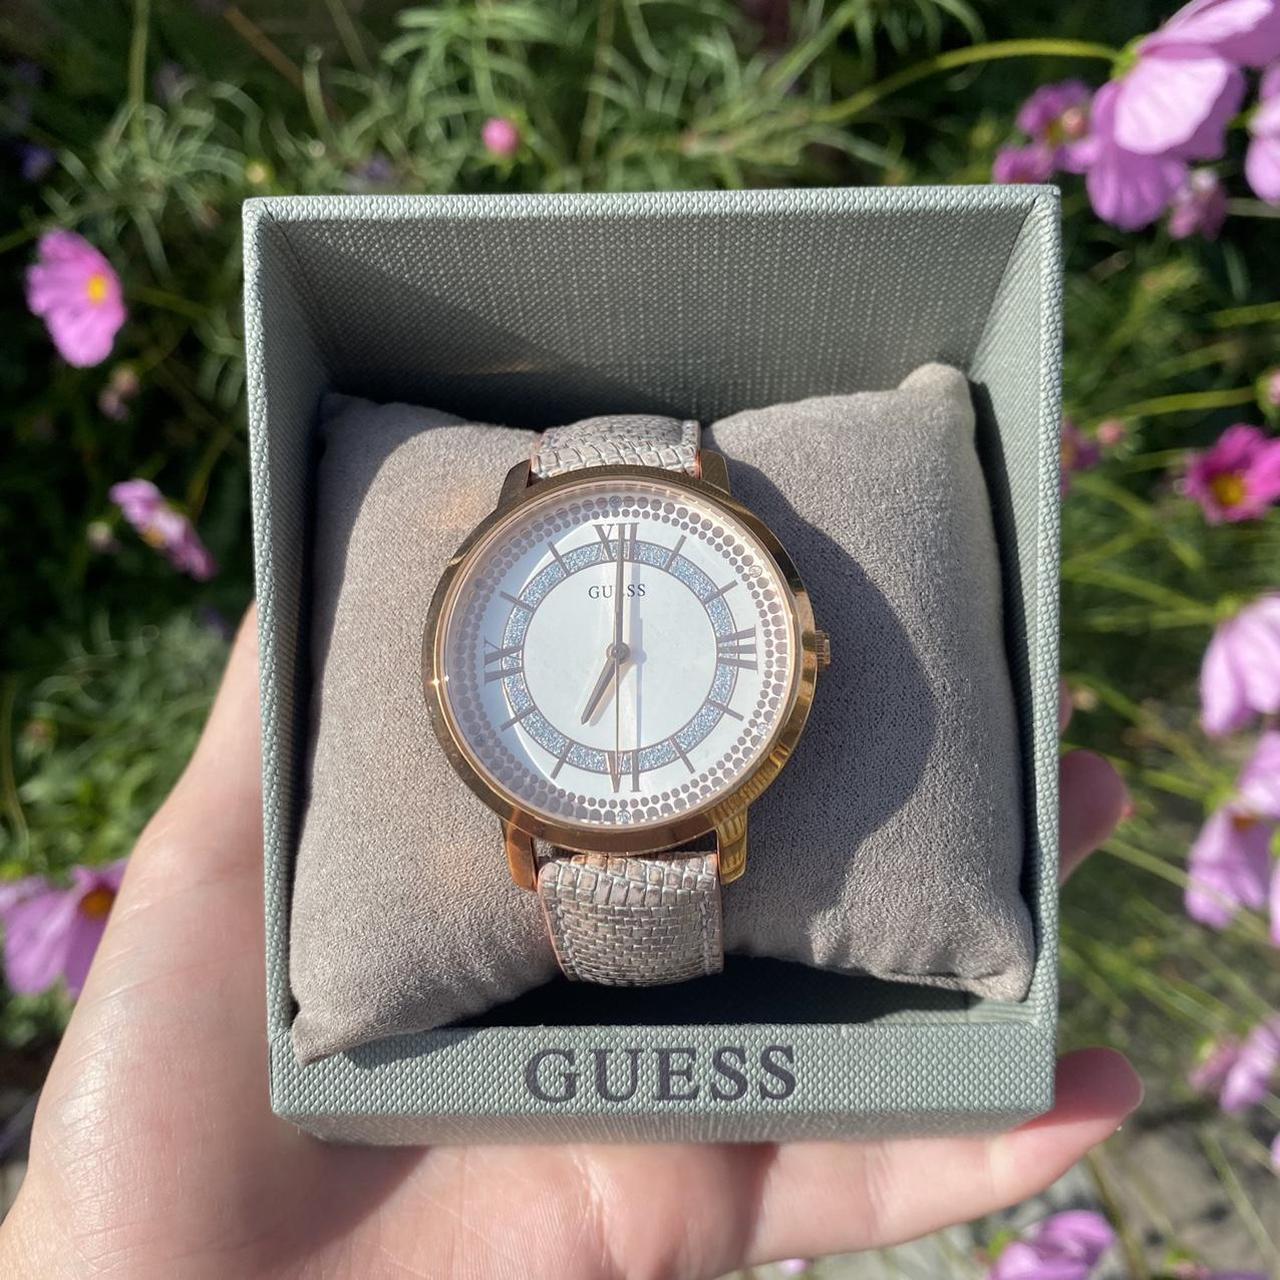 Product Image 3 - Guess ladies watch 💘
super cute